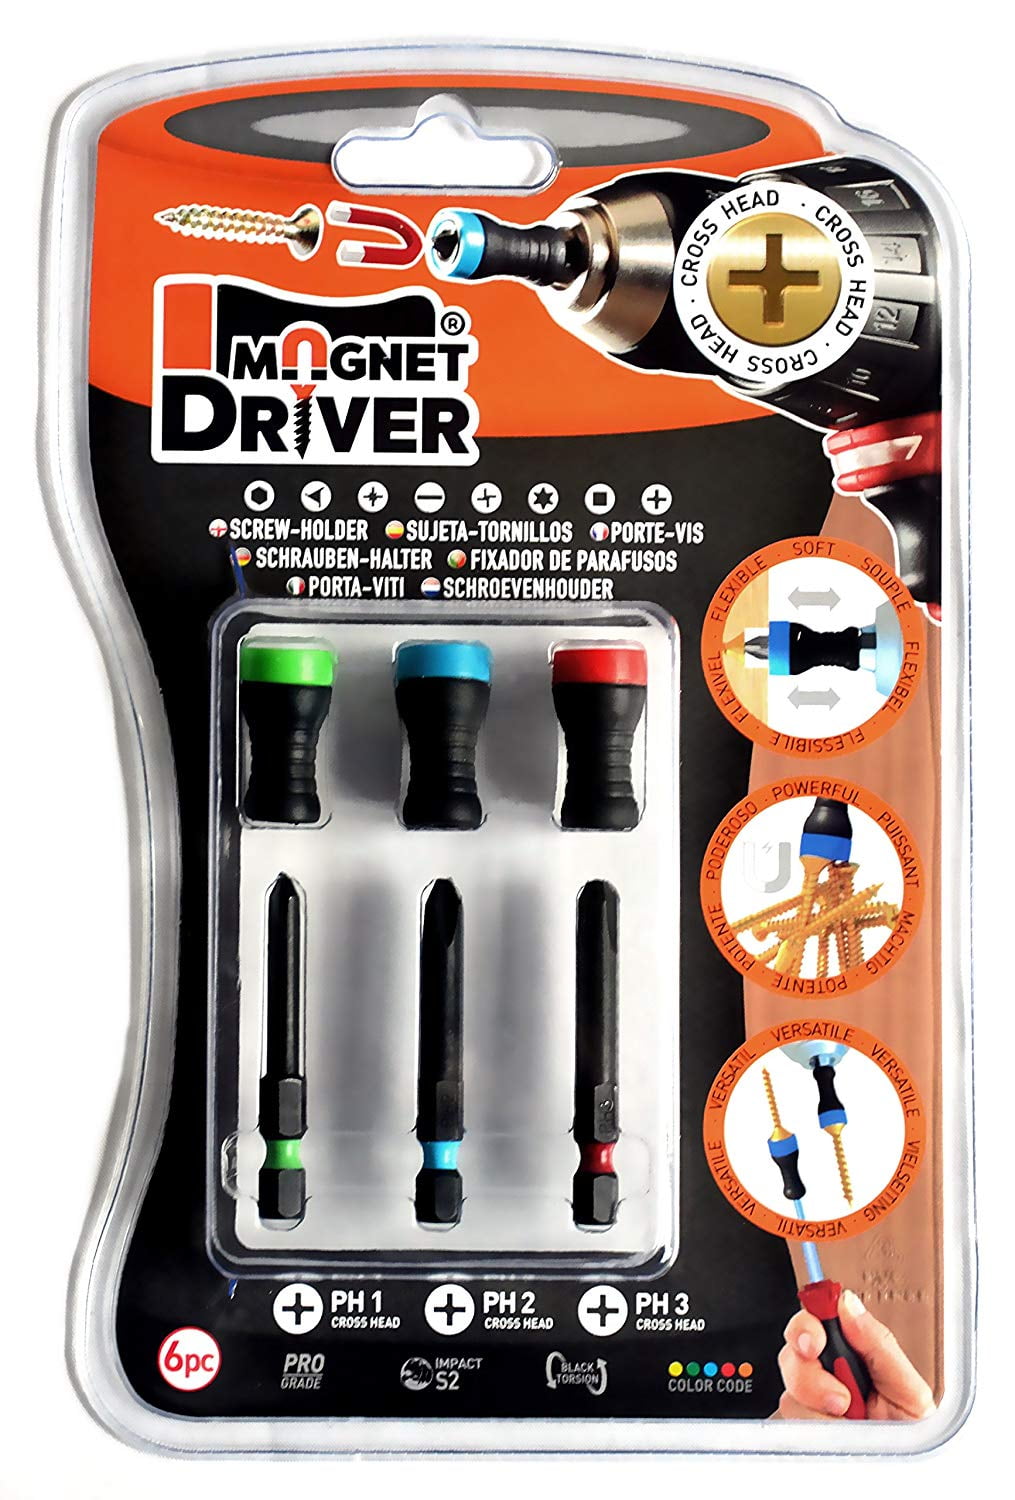 Magnet Driver Screw-Holder by Micaton Allows Countersinking Magnetic Screwdriver Attachment B33PH Fits Screwdrivers and Power Bits No Wobbling or Falling Screws